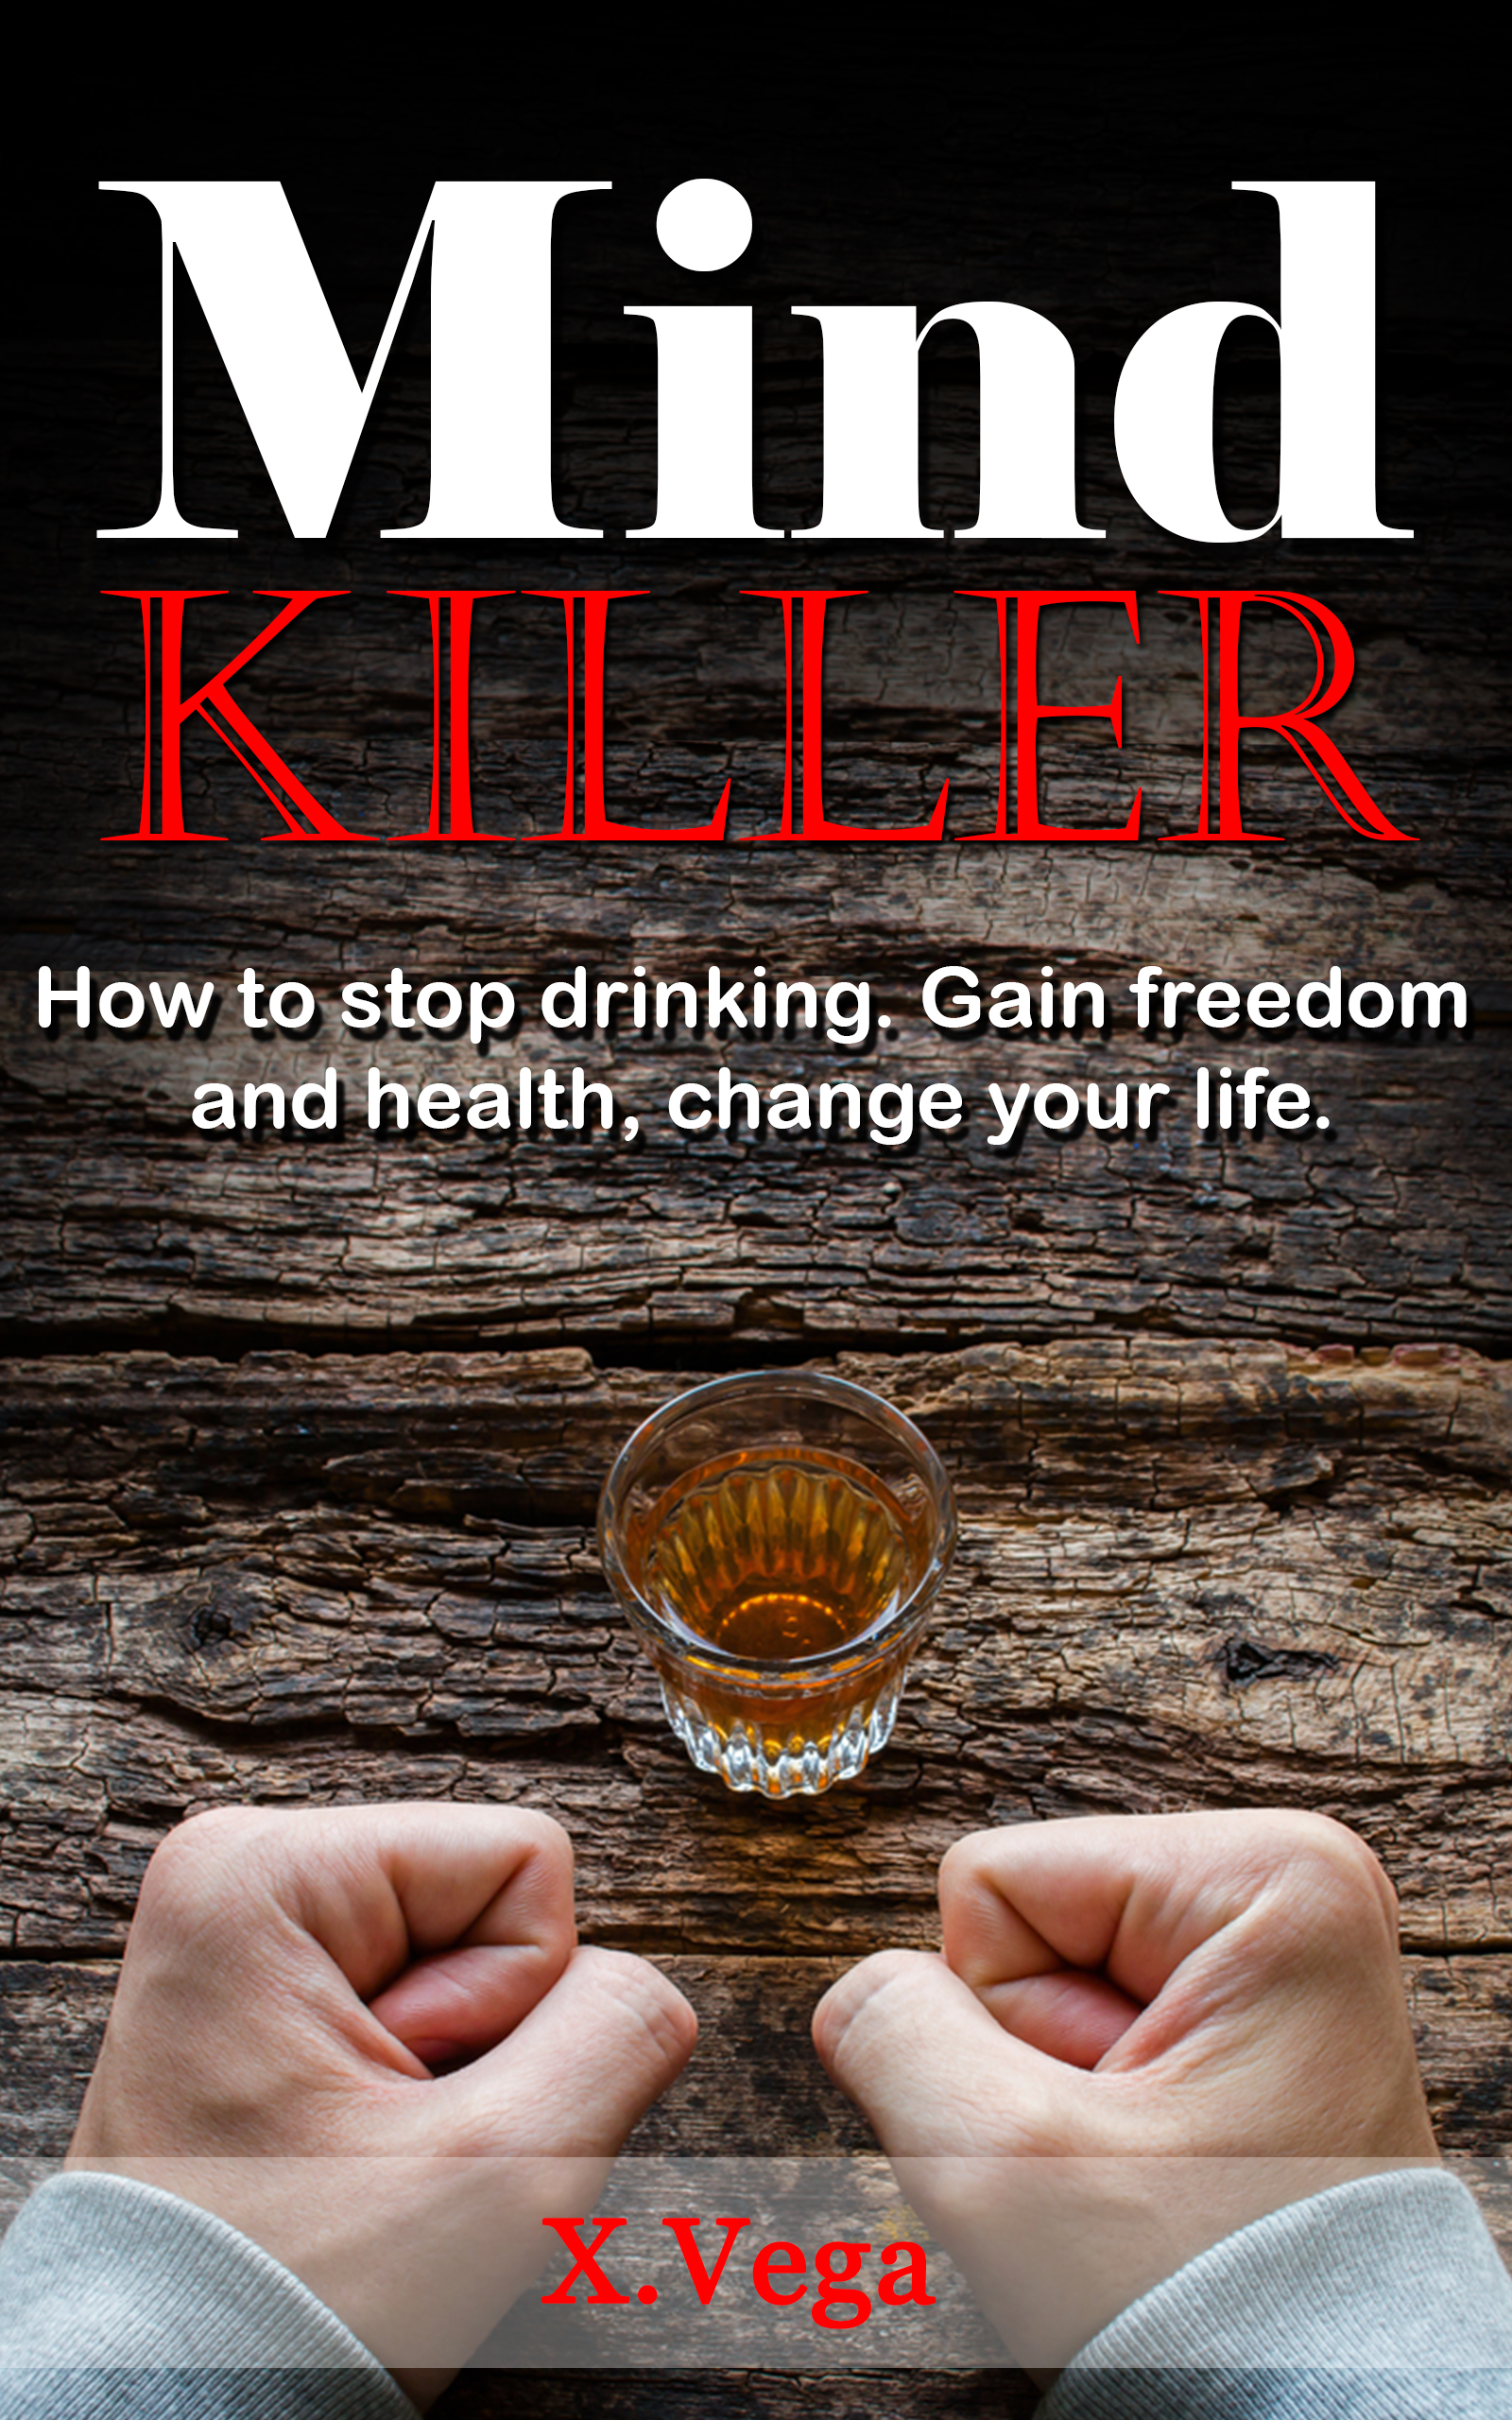 FREE: Mind killer: How to Stop Drinking. Gain Freedom and Health, Change Your Life by Xavier Vega